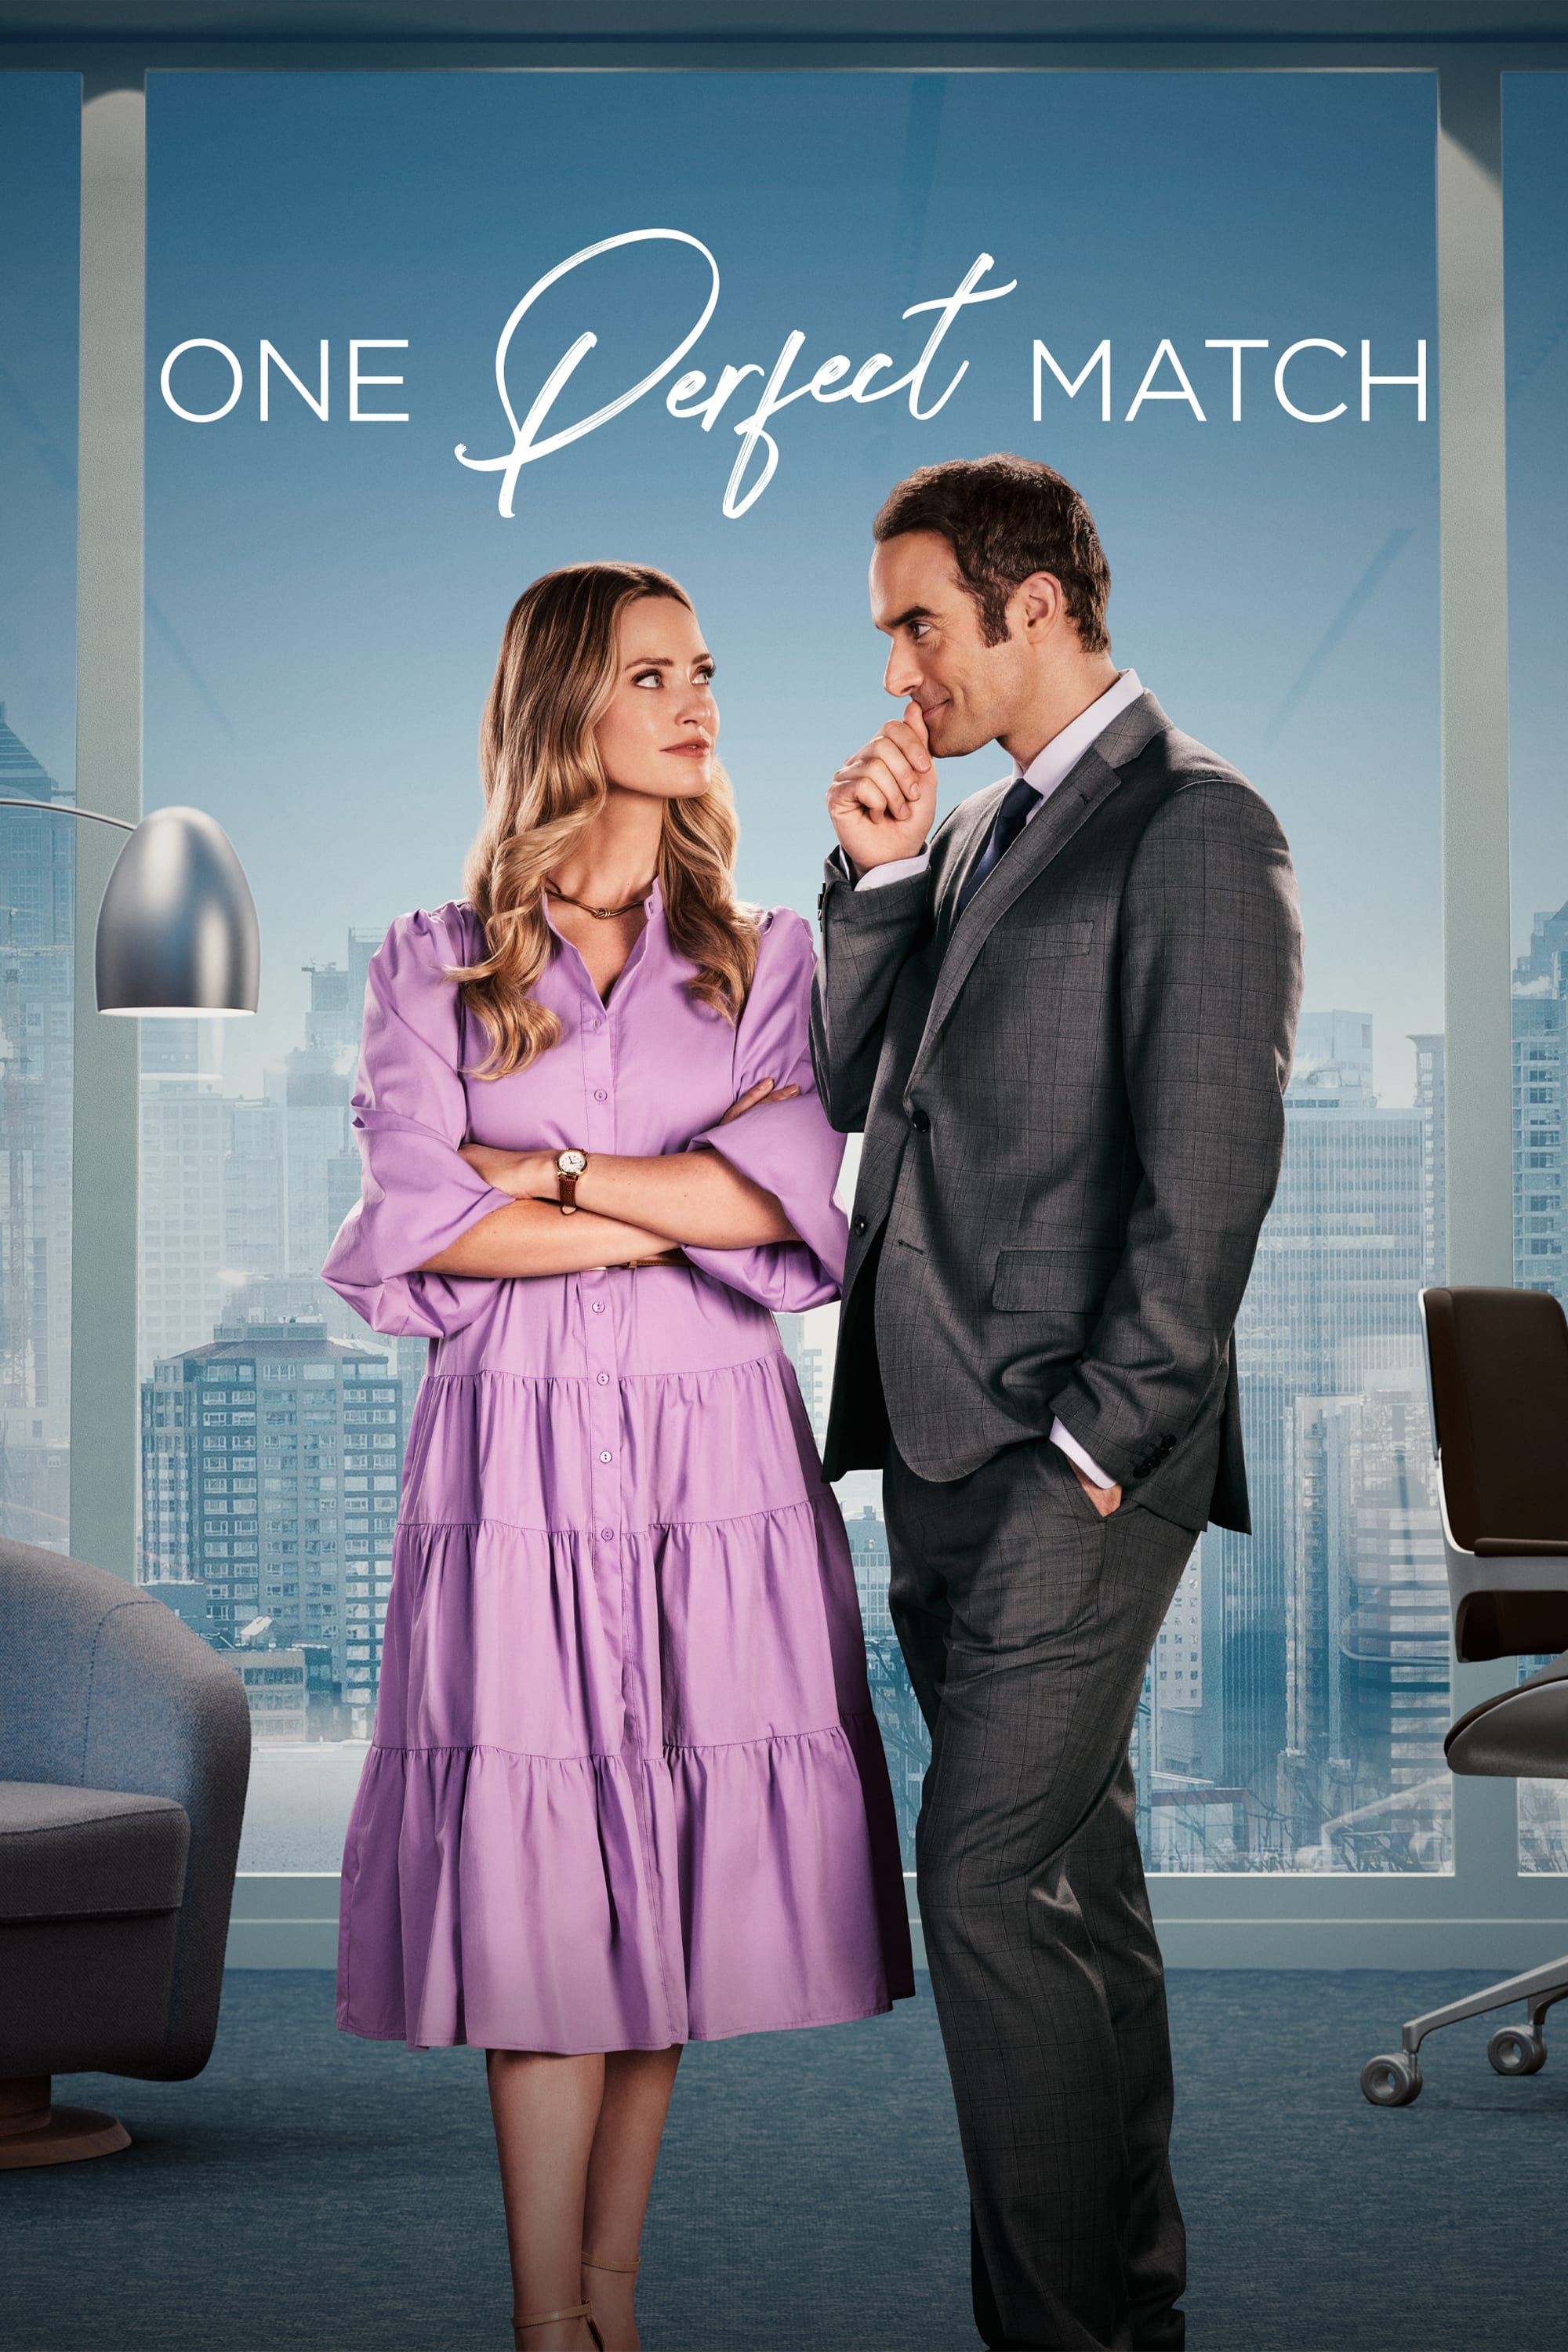 One Perfect Match Movie poster